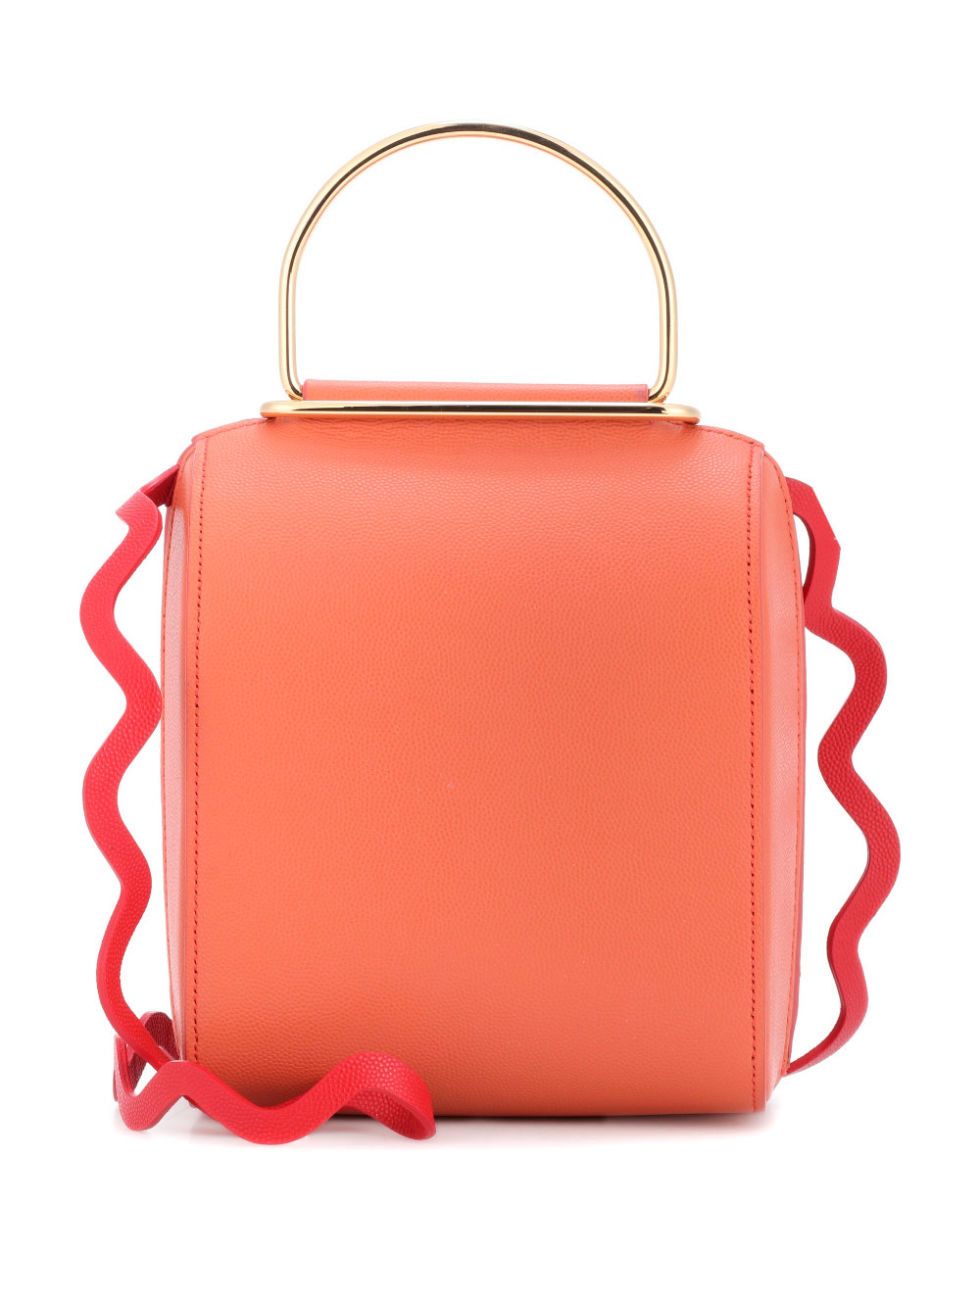 Handbag, Bag, Red, Fashion accessory, Orange, Pink, Luggage and bags, Leather, Material property, Kelly bag, 